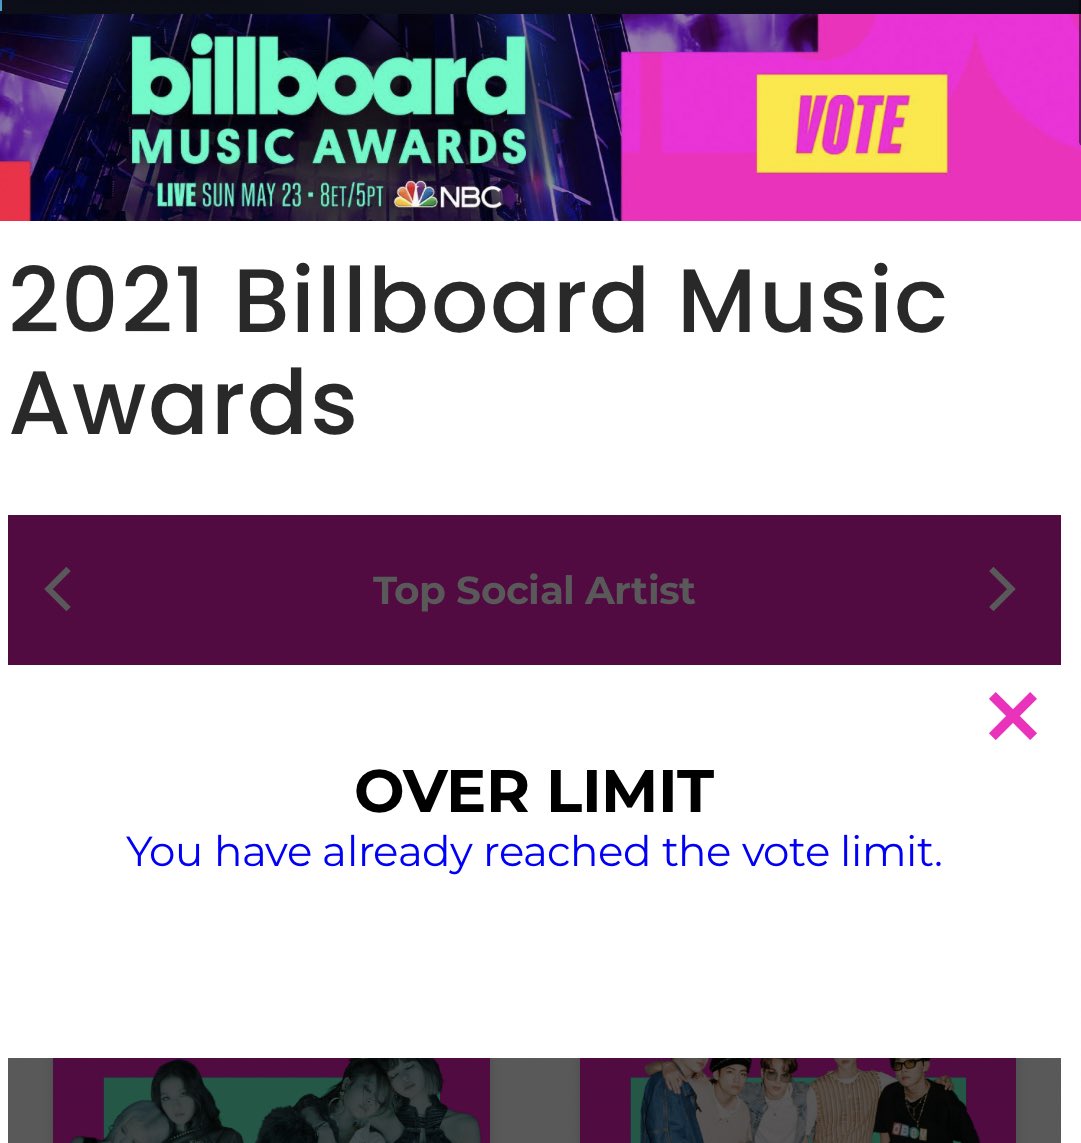 Please vote on the website too when you have time until it's over limit. @BTS_twt billboard.com/BBMAsVote